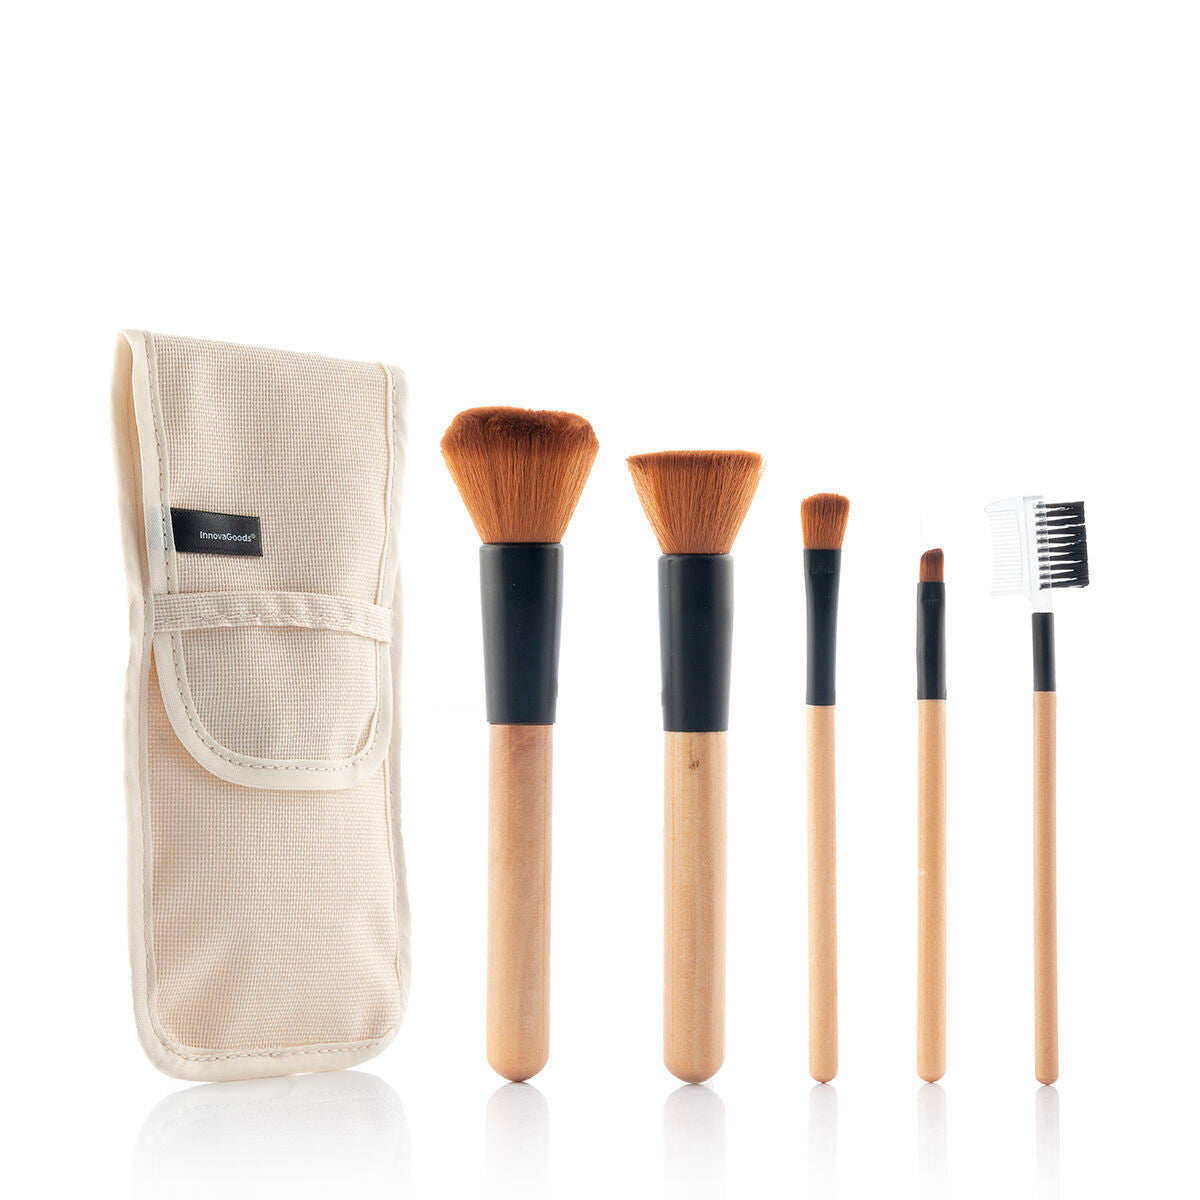 Set of Wooden Make-up Brushes with Carry Case Miset InnovaGoods 5 Pieces